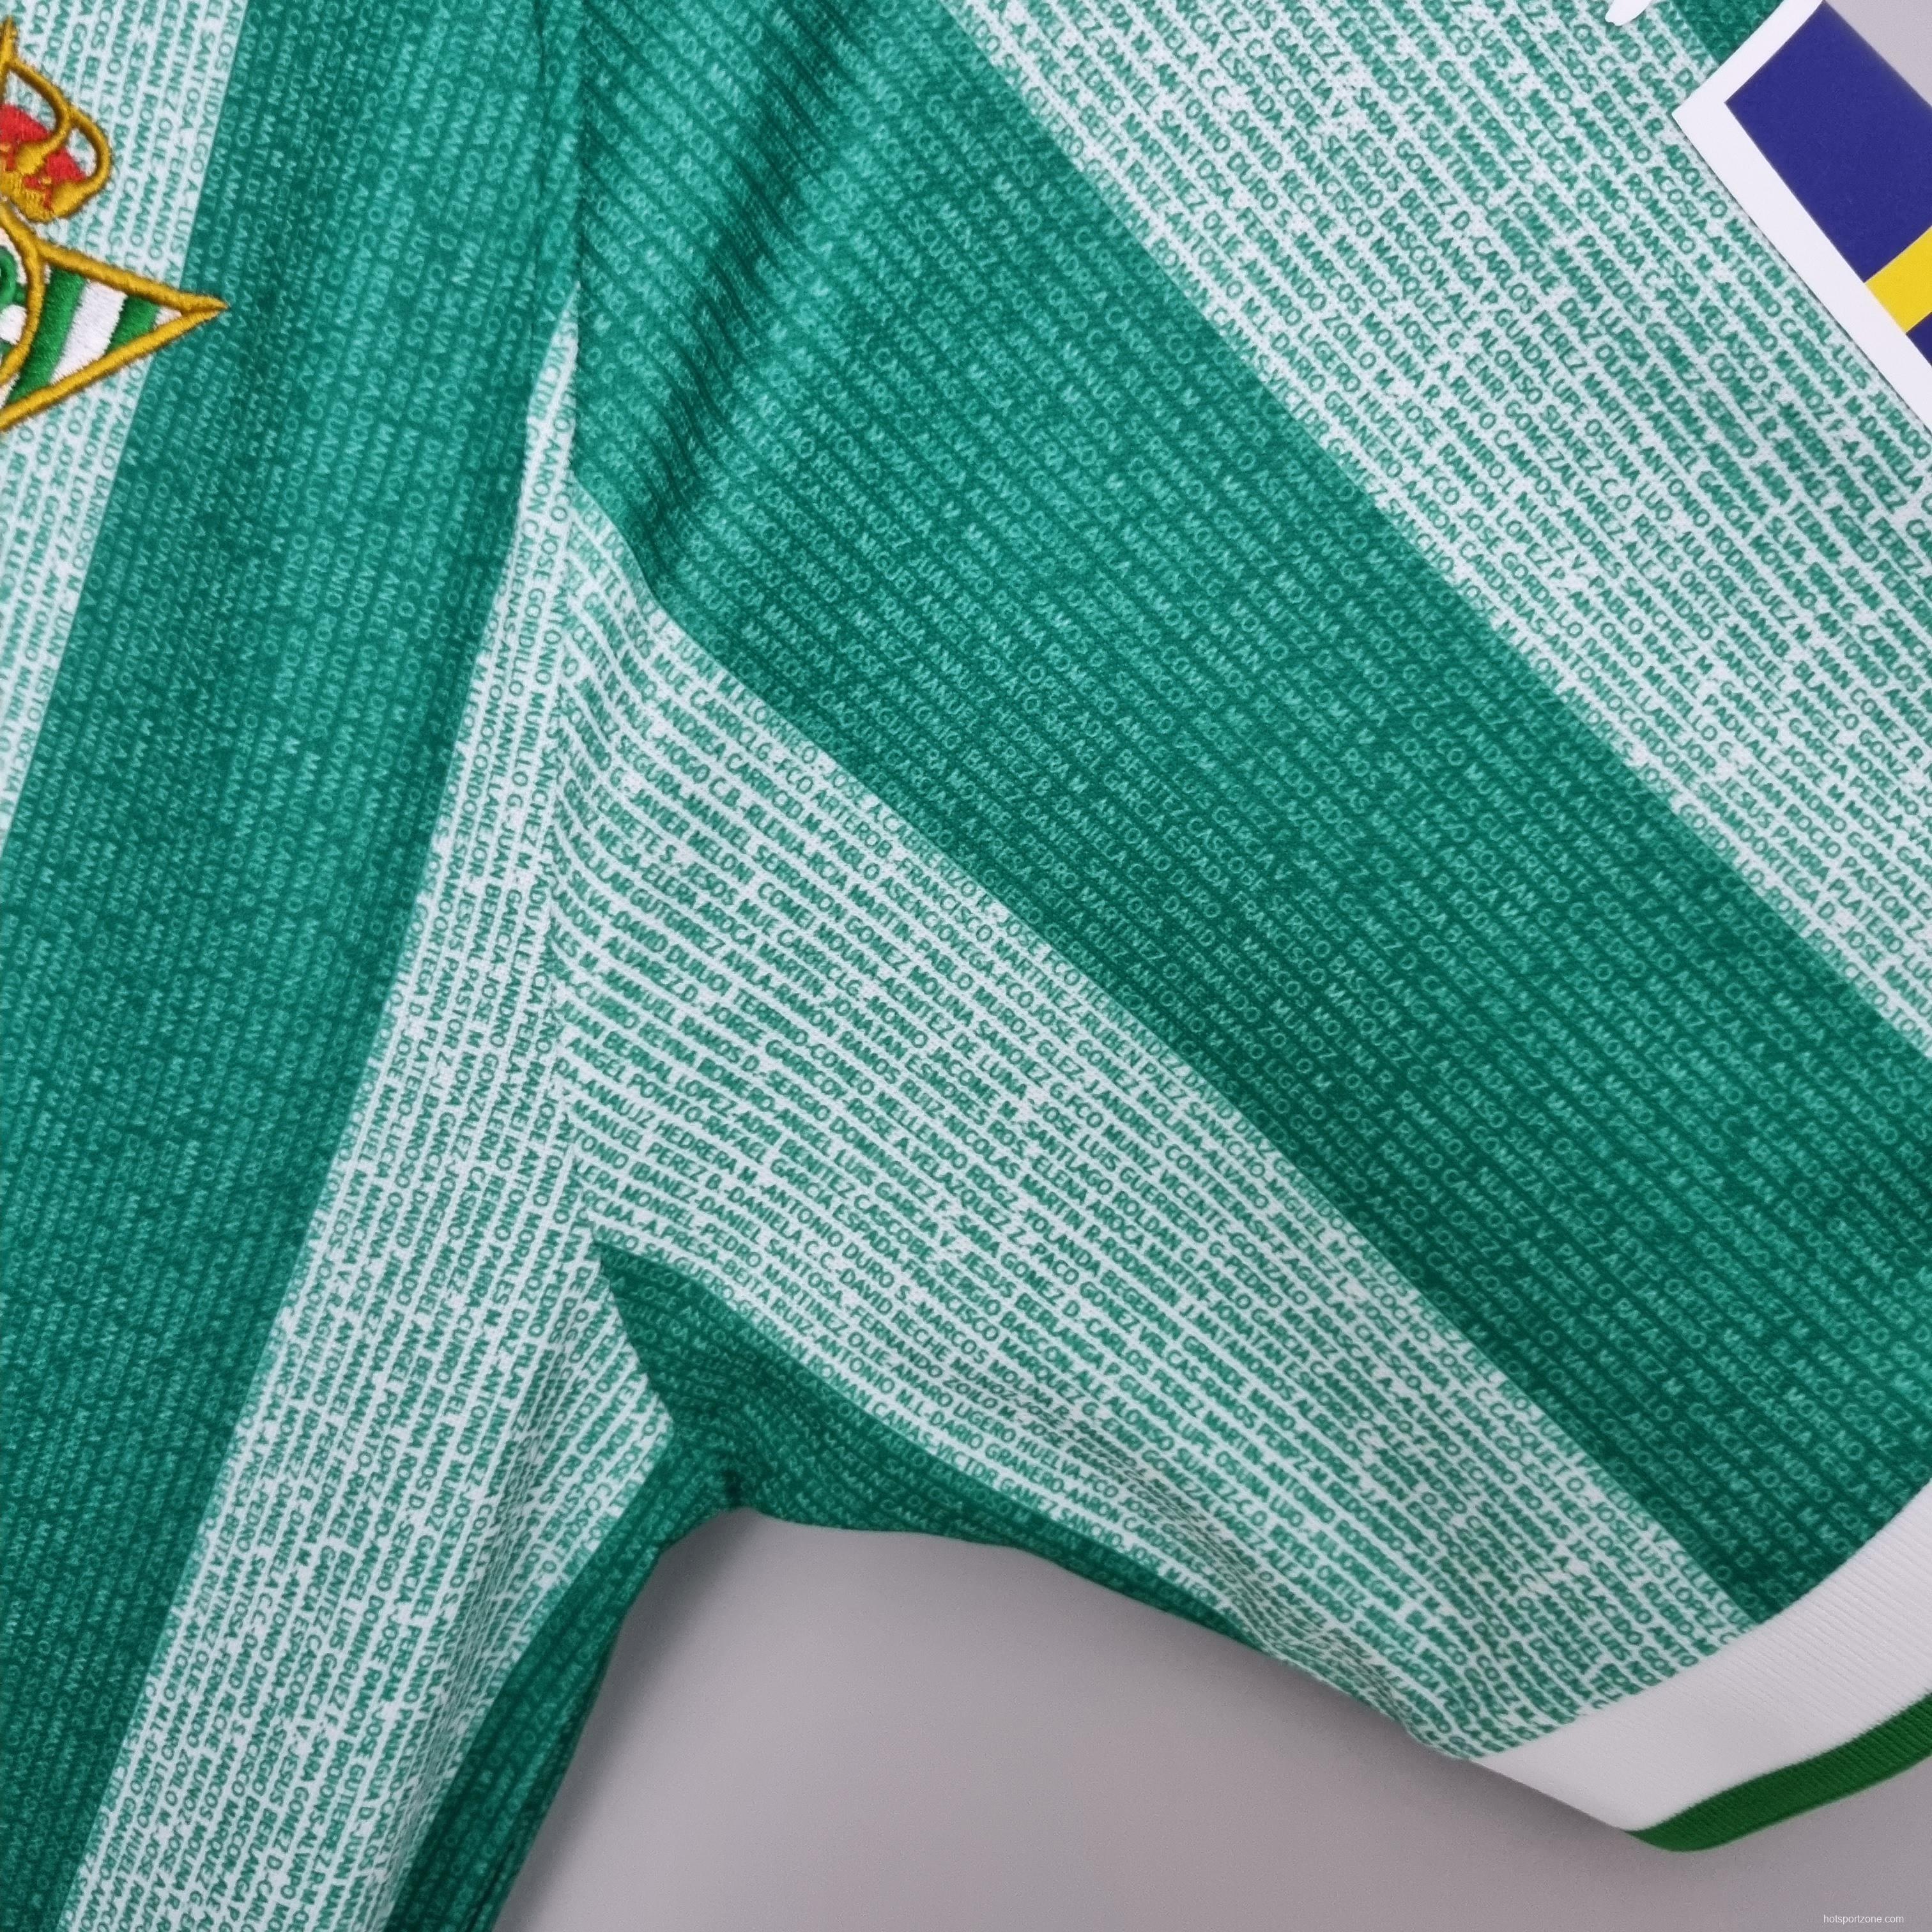 22/23 Real Betis Special Edition Soccer Jersey